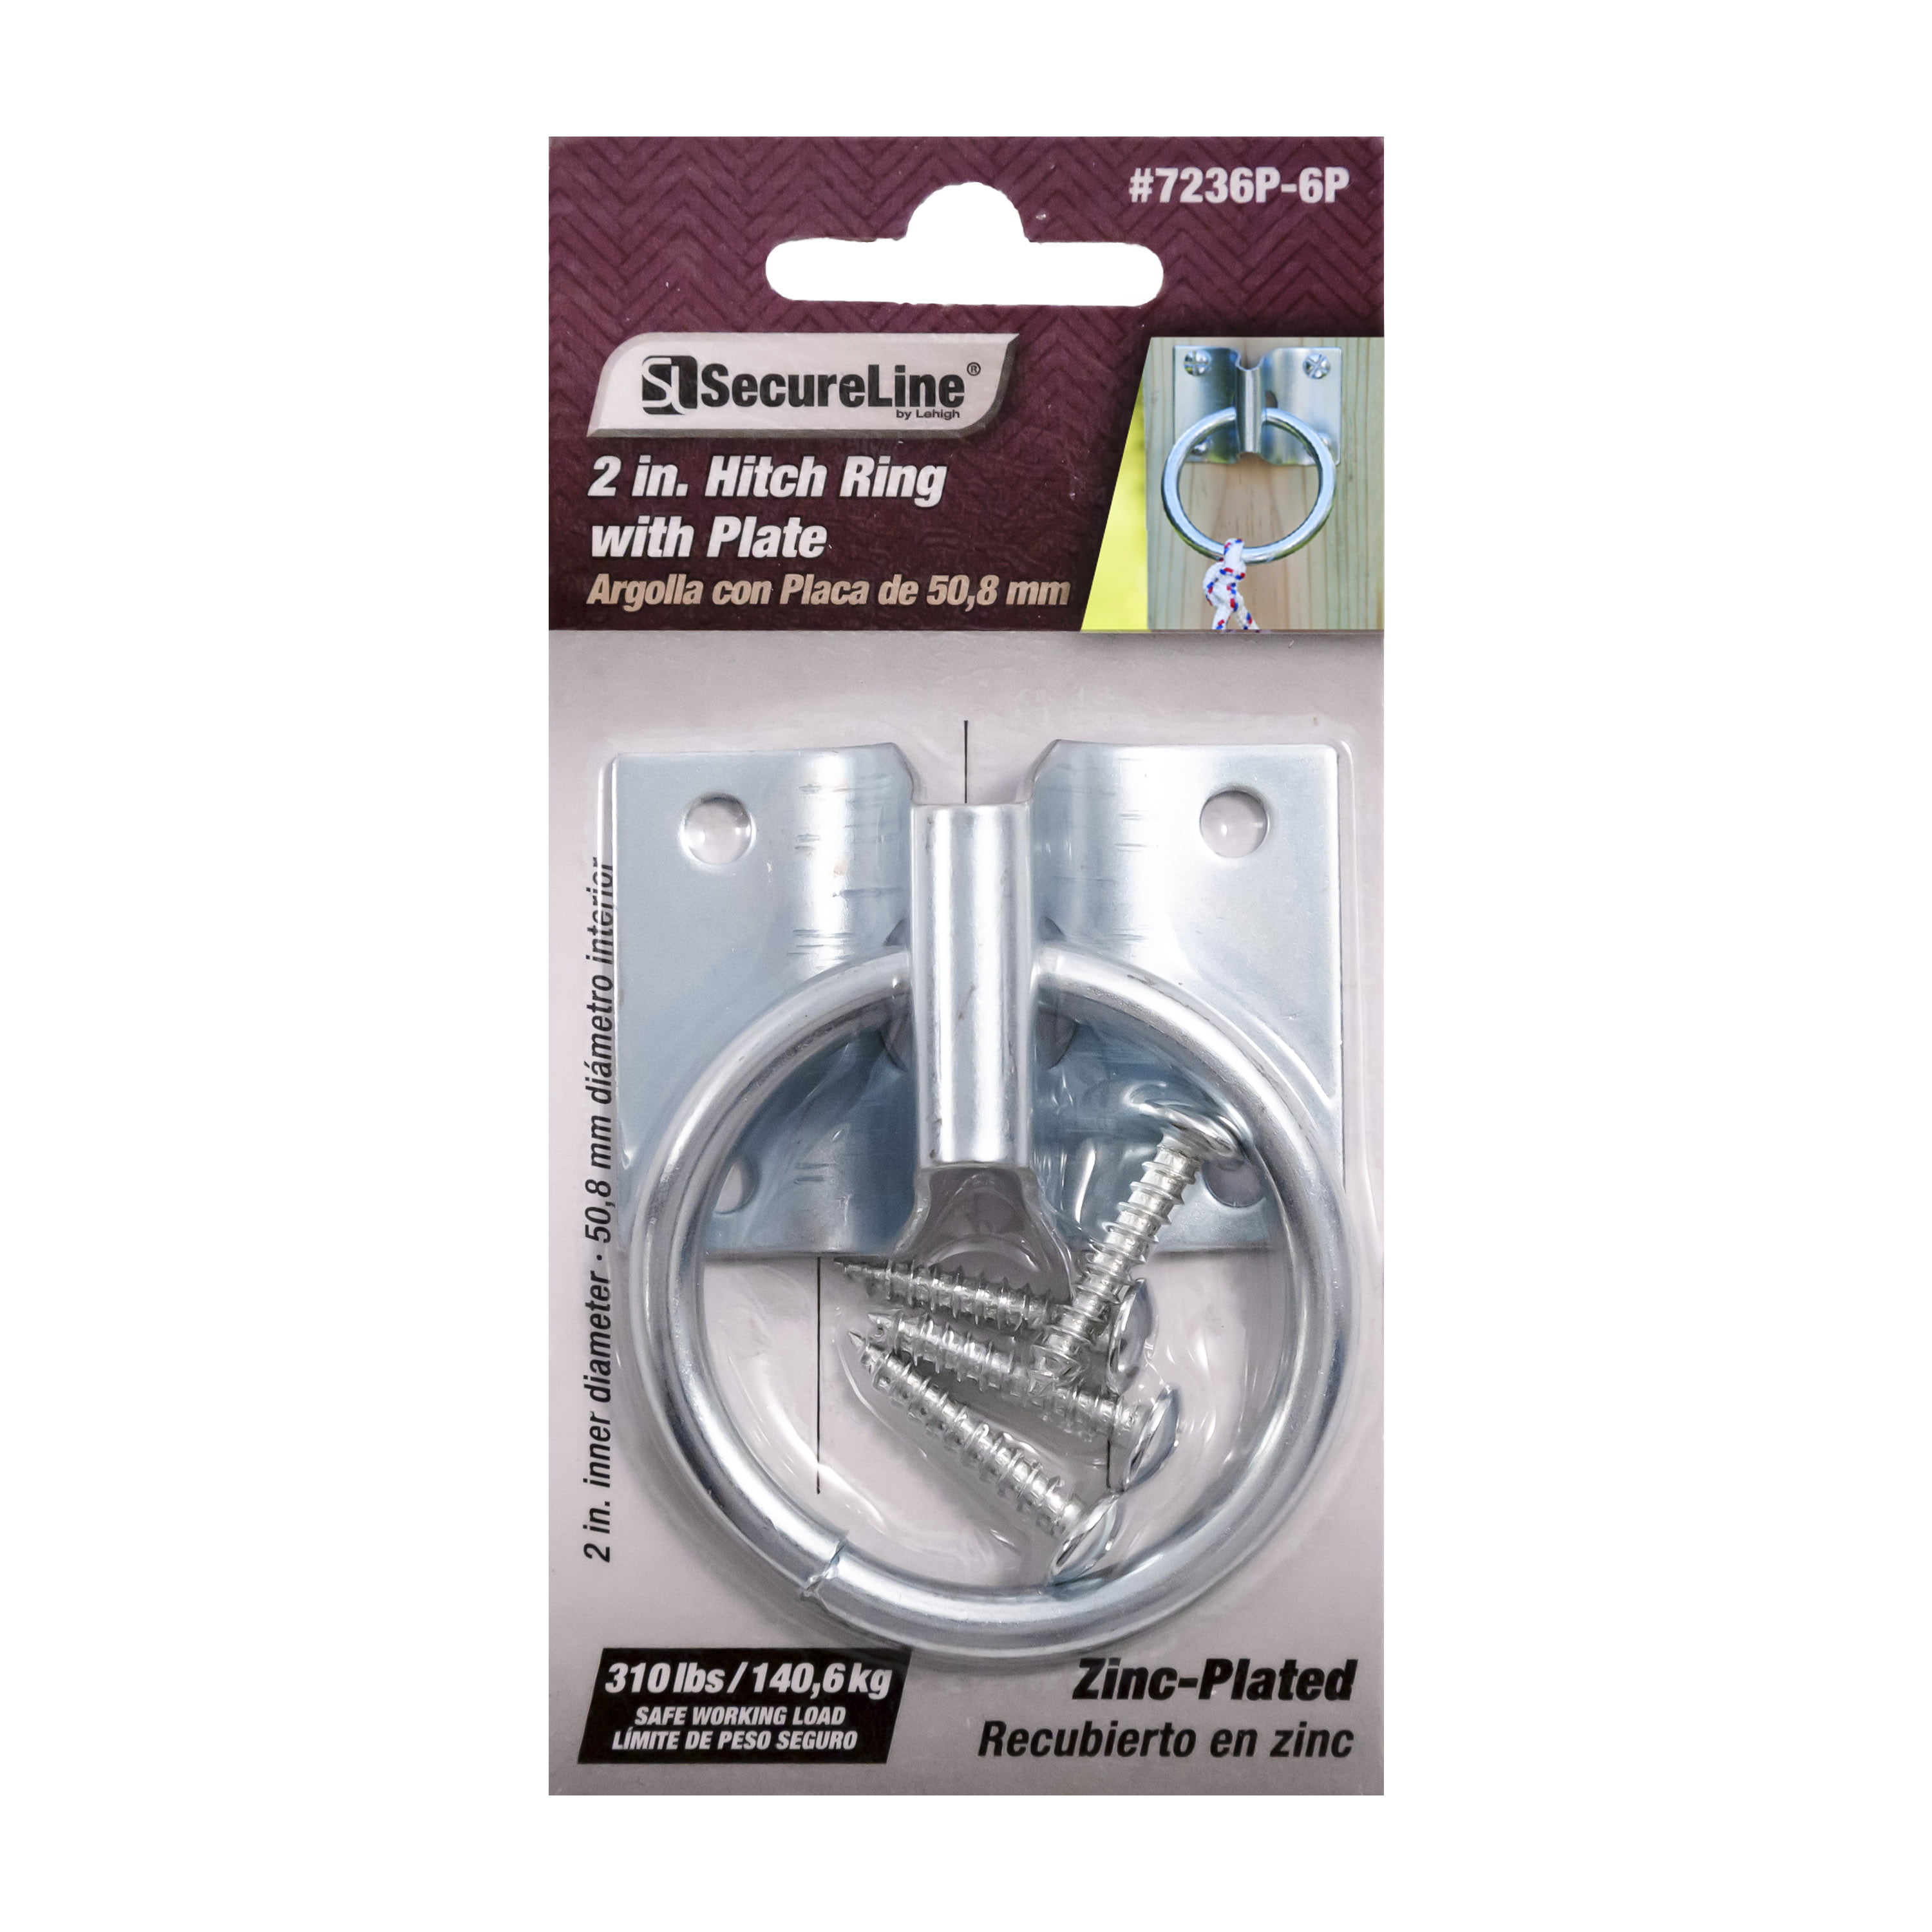 Zinc-Plated Hitch Ring with Wall Mount 2" ring CASE OF 50 EVERBILT 2.7 in 